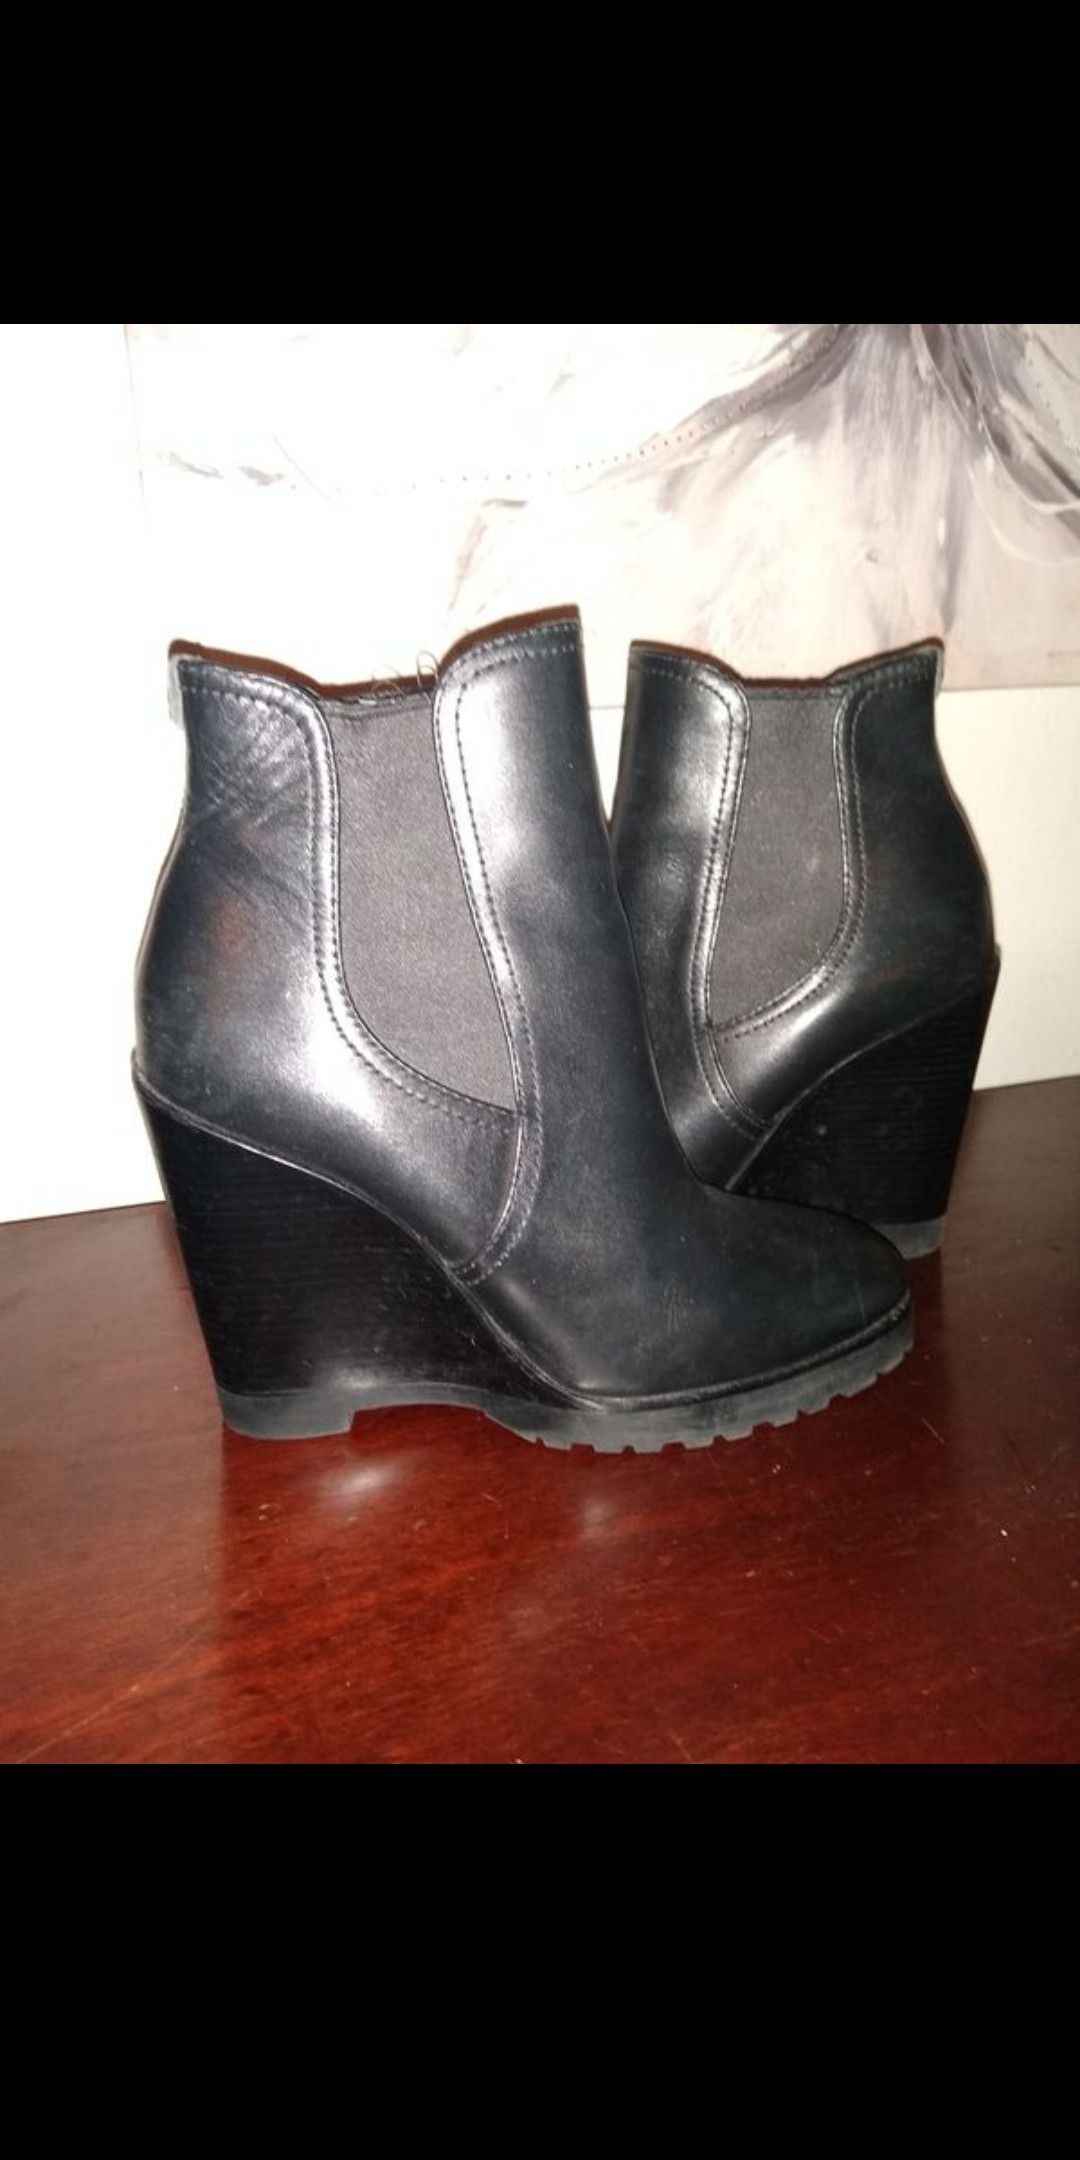 Women's Michael kors ankle boot wedges shoes